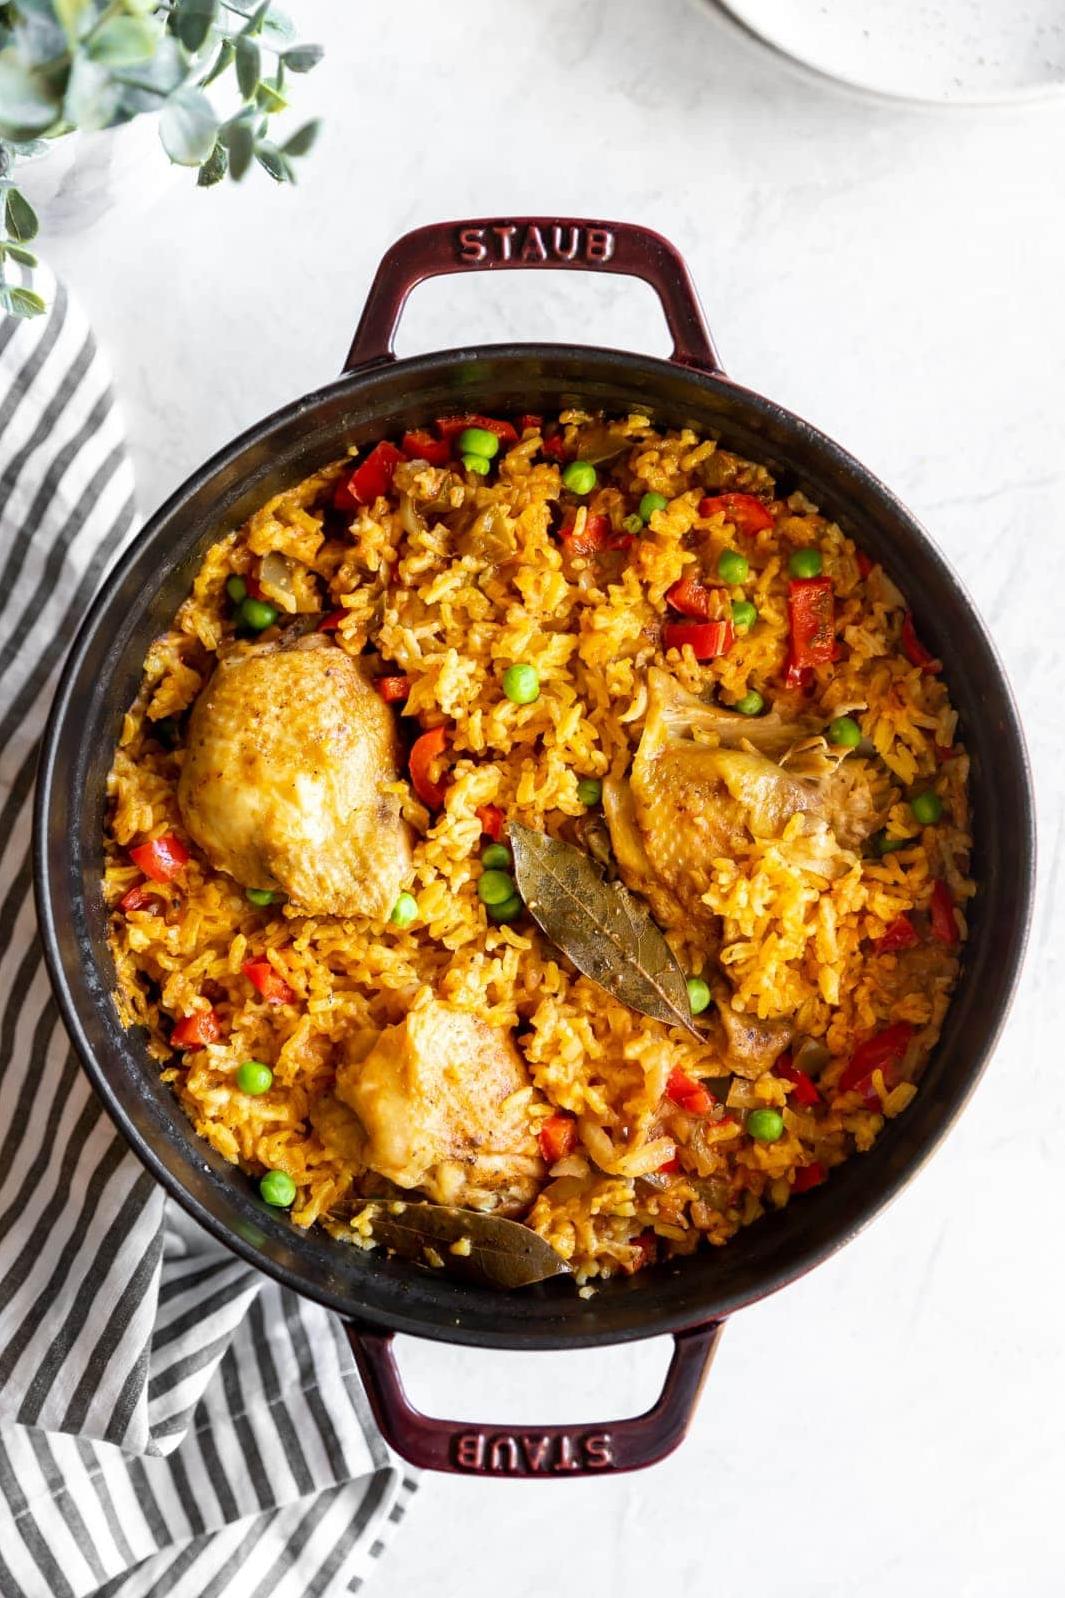  Take your taste buds on a trip to Brazil with this Arroz Con Pollo recipe